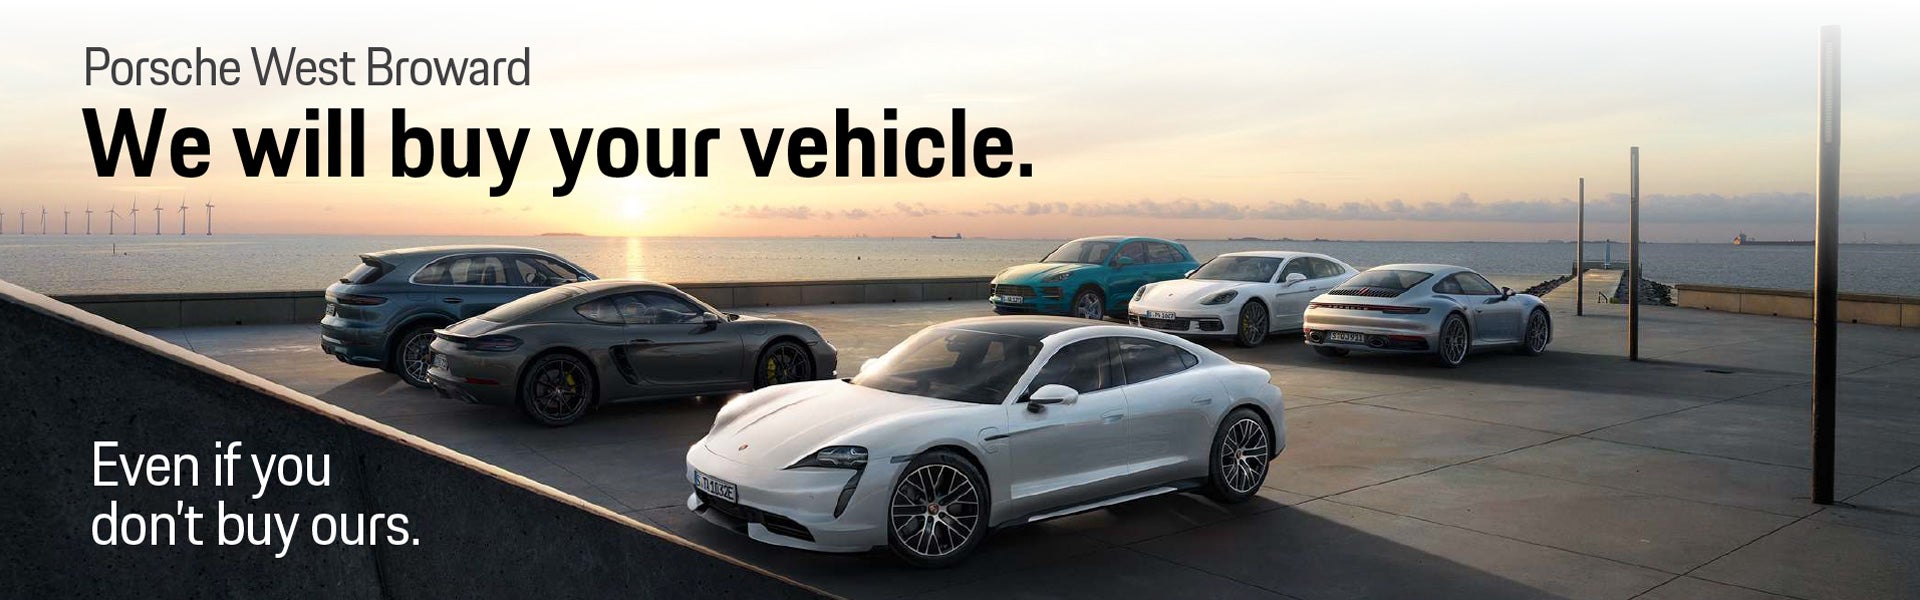 We Will Buy Your Vehicle. Even if you don't buy ours.